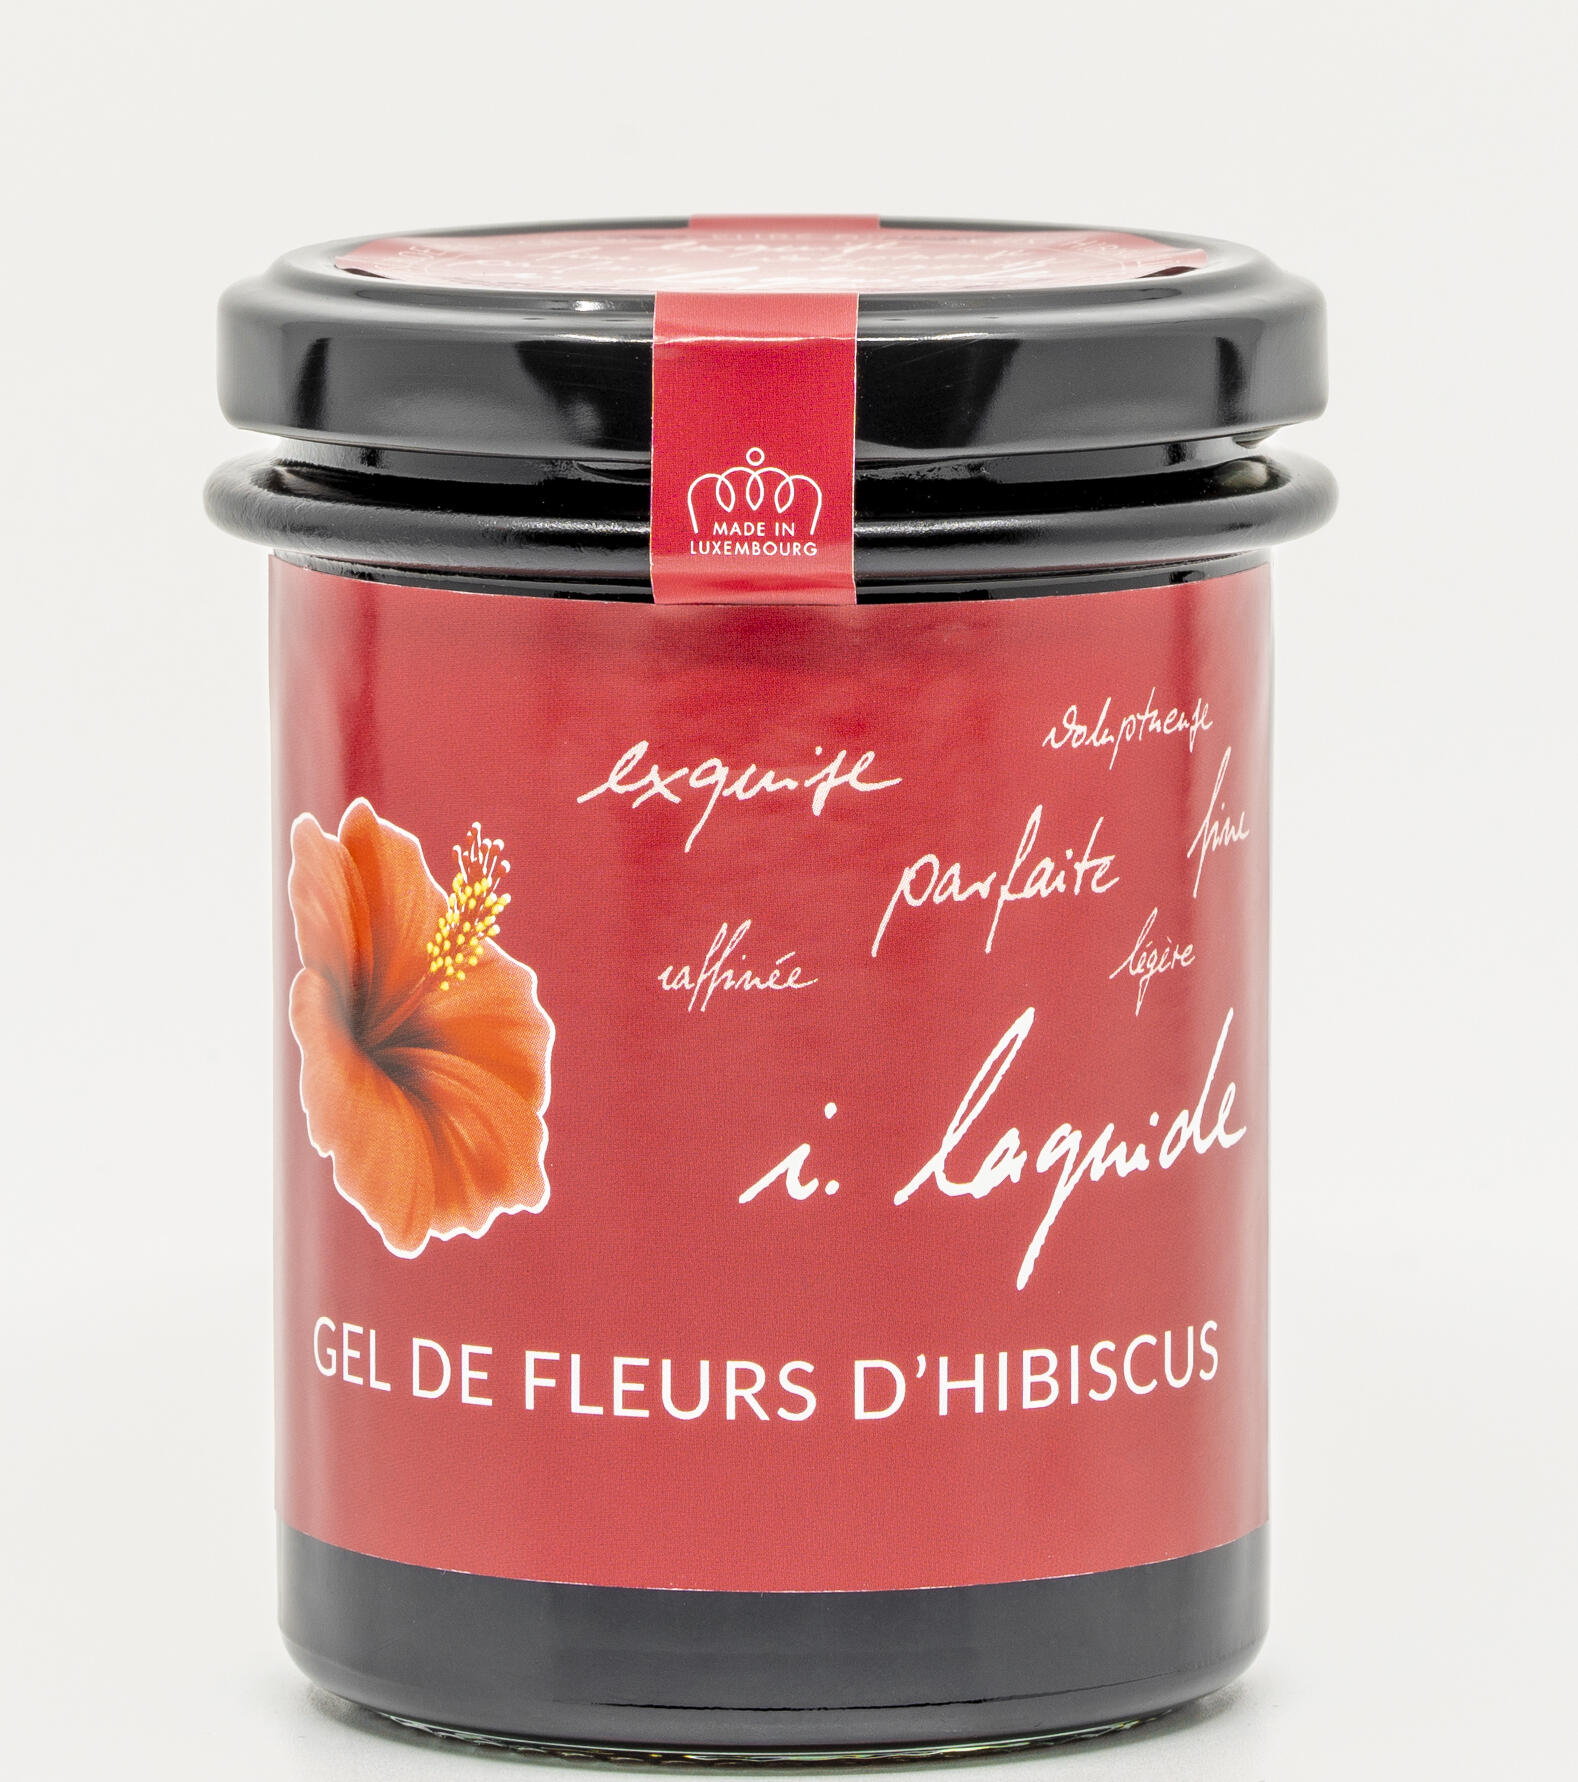 Hibiscus jelly (Excellence Hibiscus)